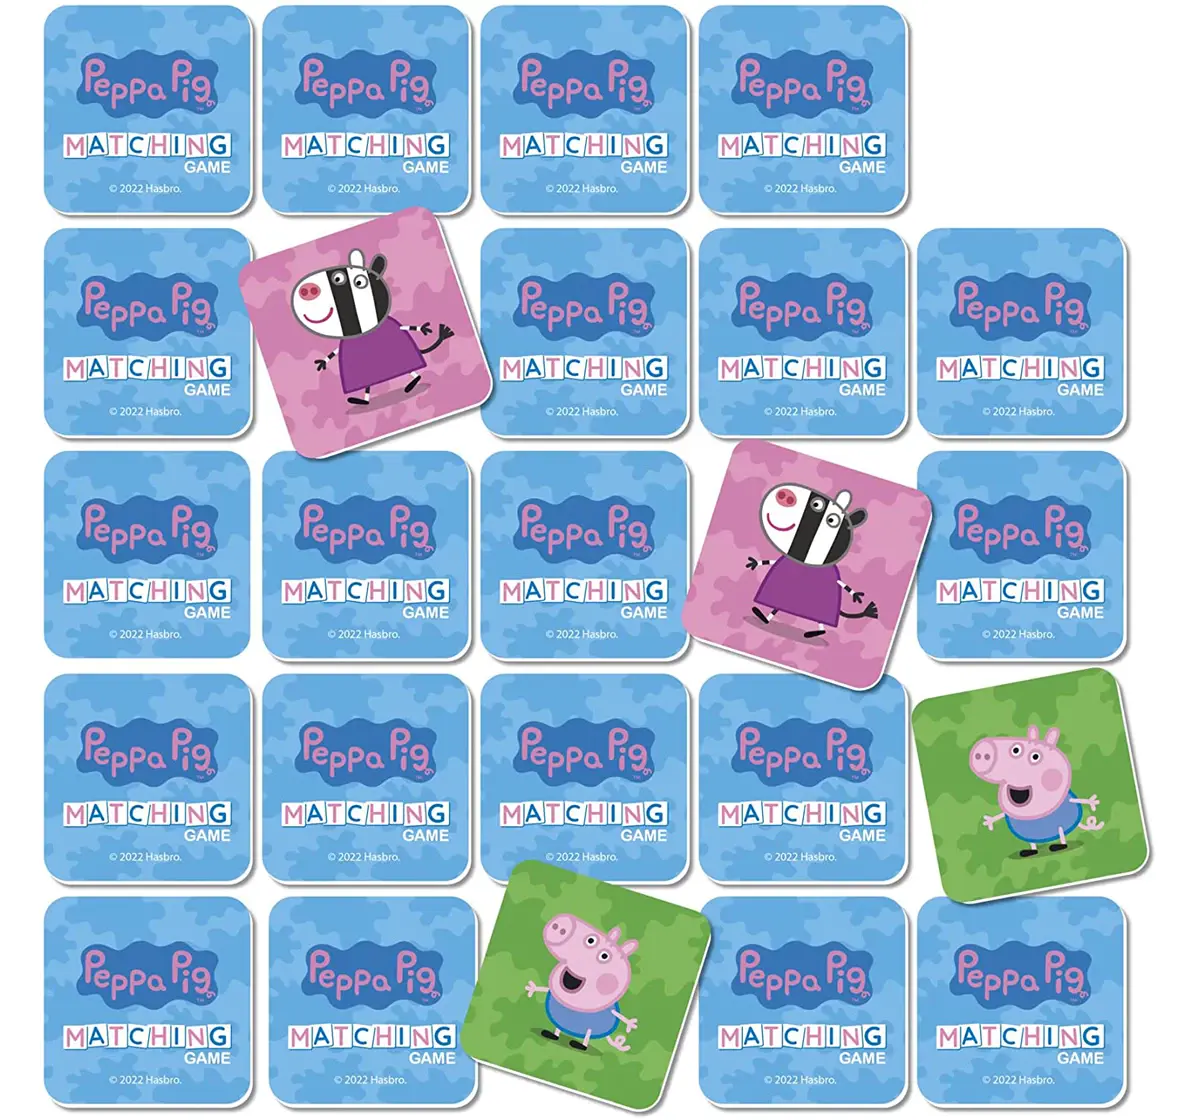 Hasbro Gaming Peppa Matching Game Board Game Multicolour 3Y+